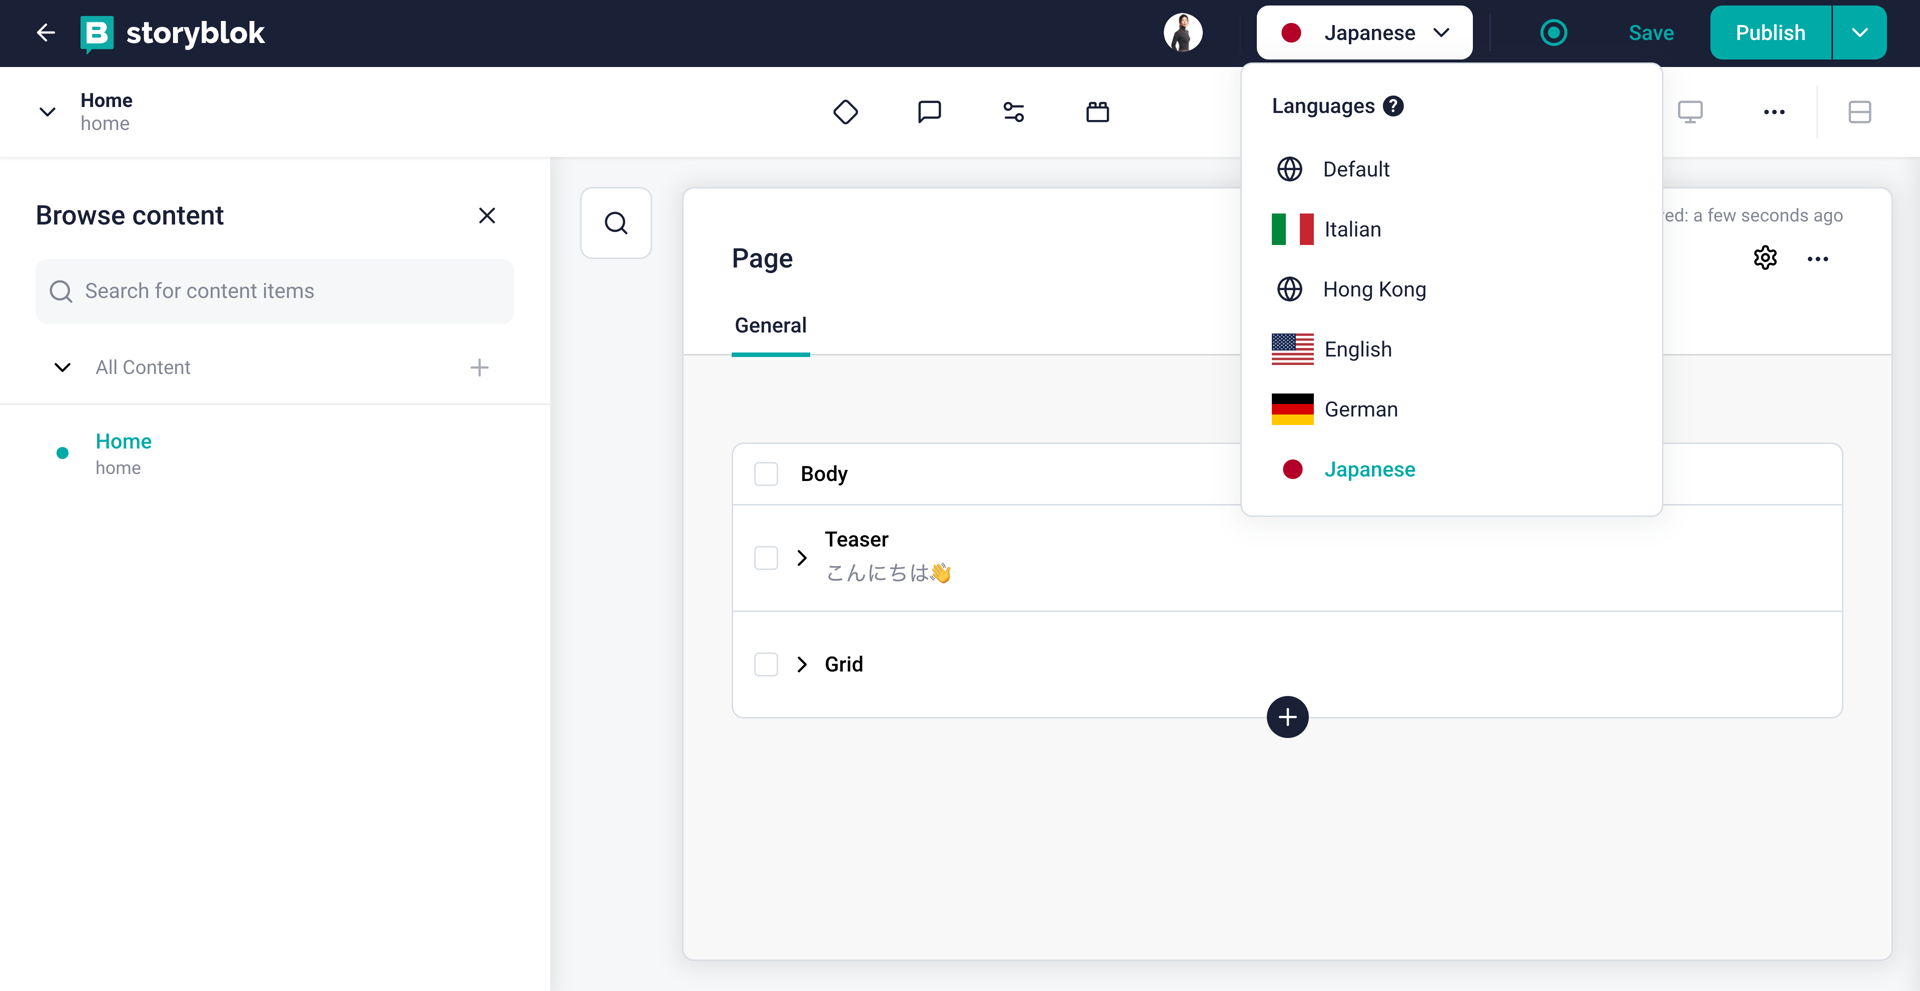 A screenshot of Storyblok UI displaying default, Italian, Hong Kong, English, German and Japanese language options to switch different localized home page in one content tree of home page